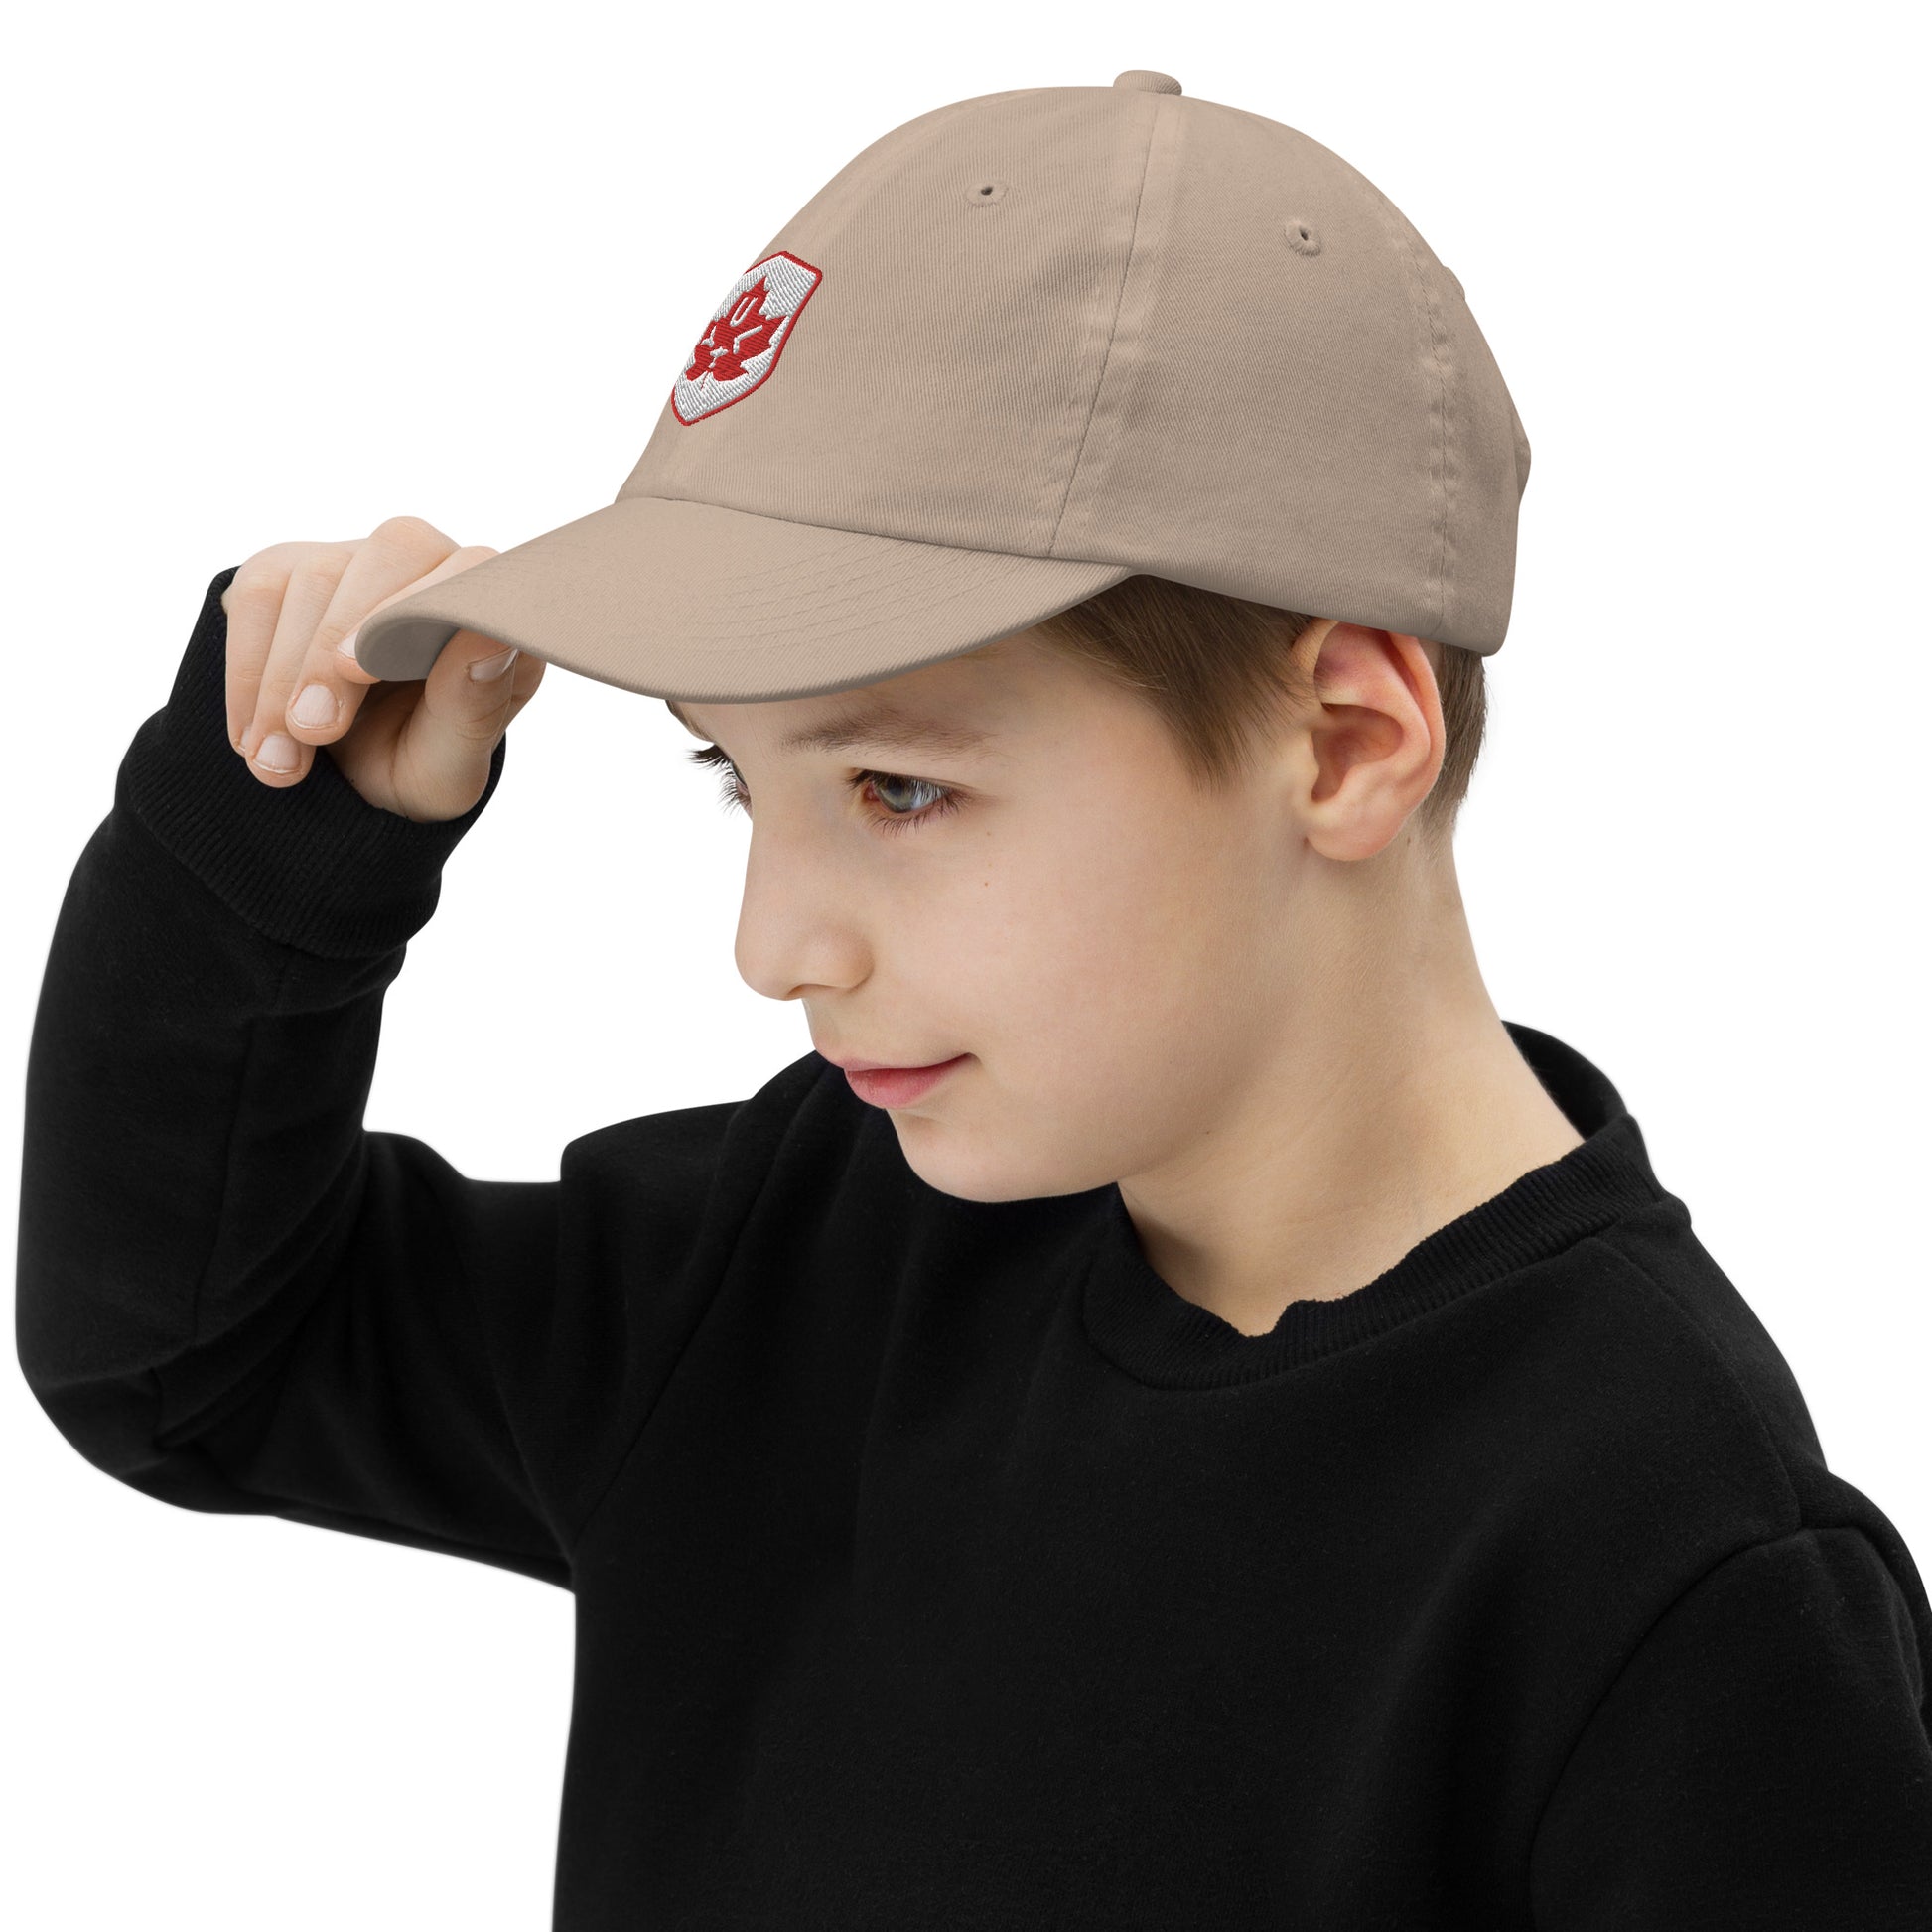 Maple Leaf Kid's Cap - Red/White • YUL Montreal • YHM Designs - Image 10